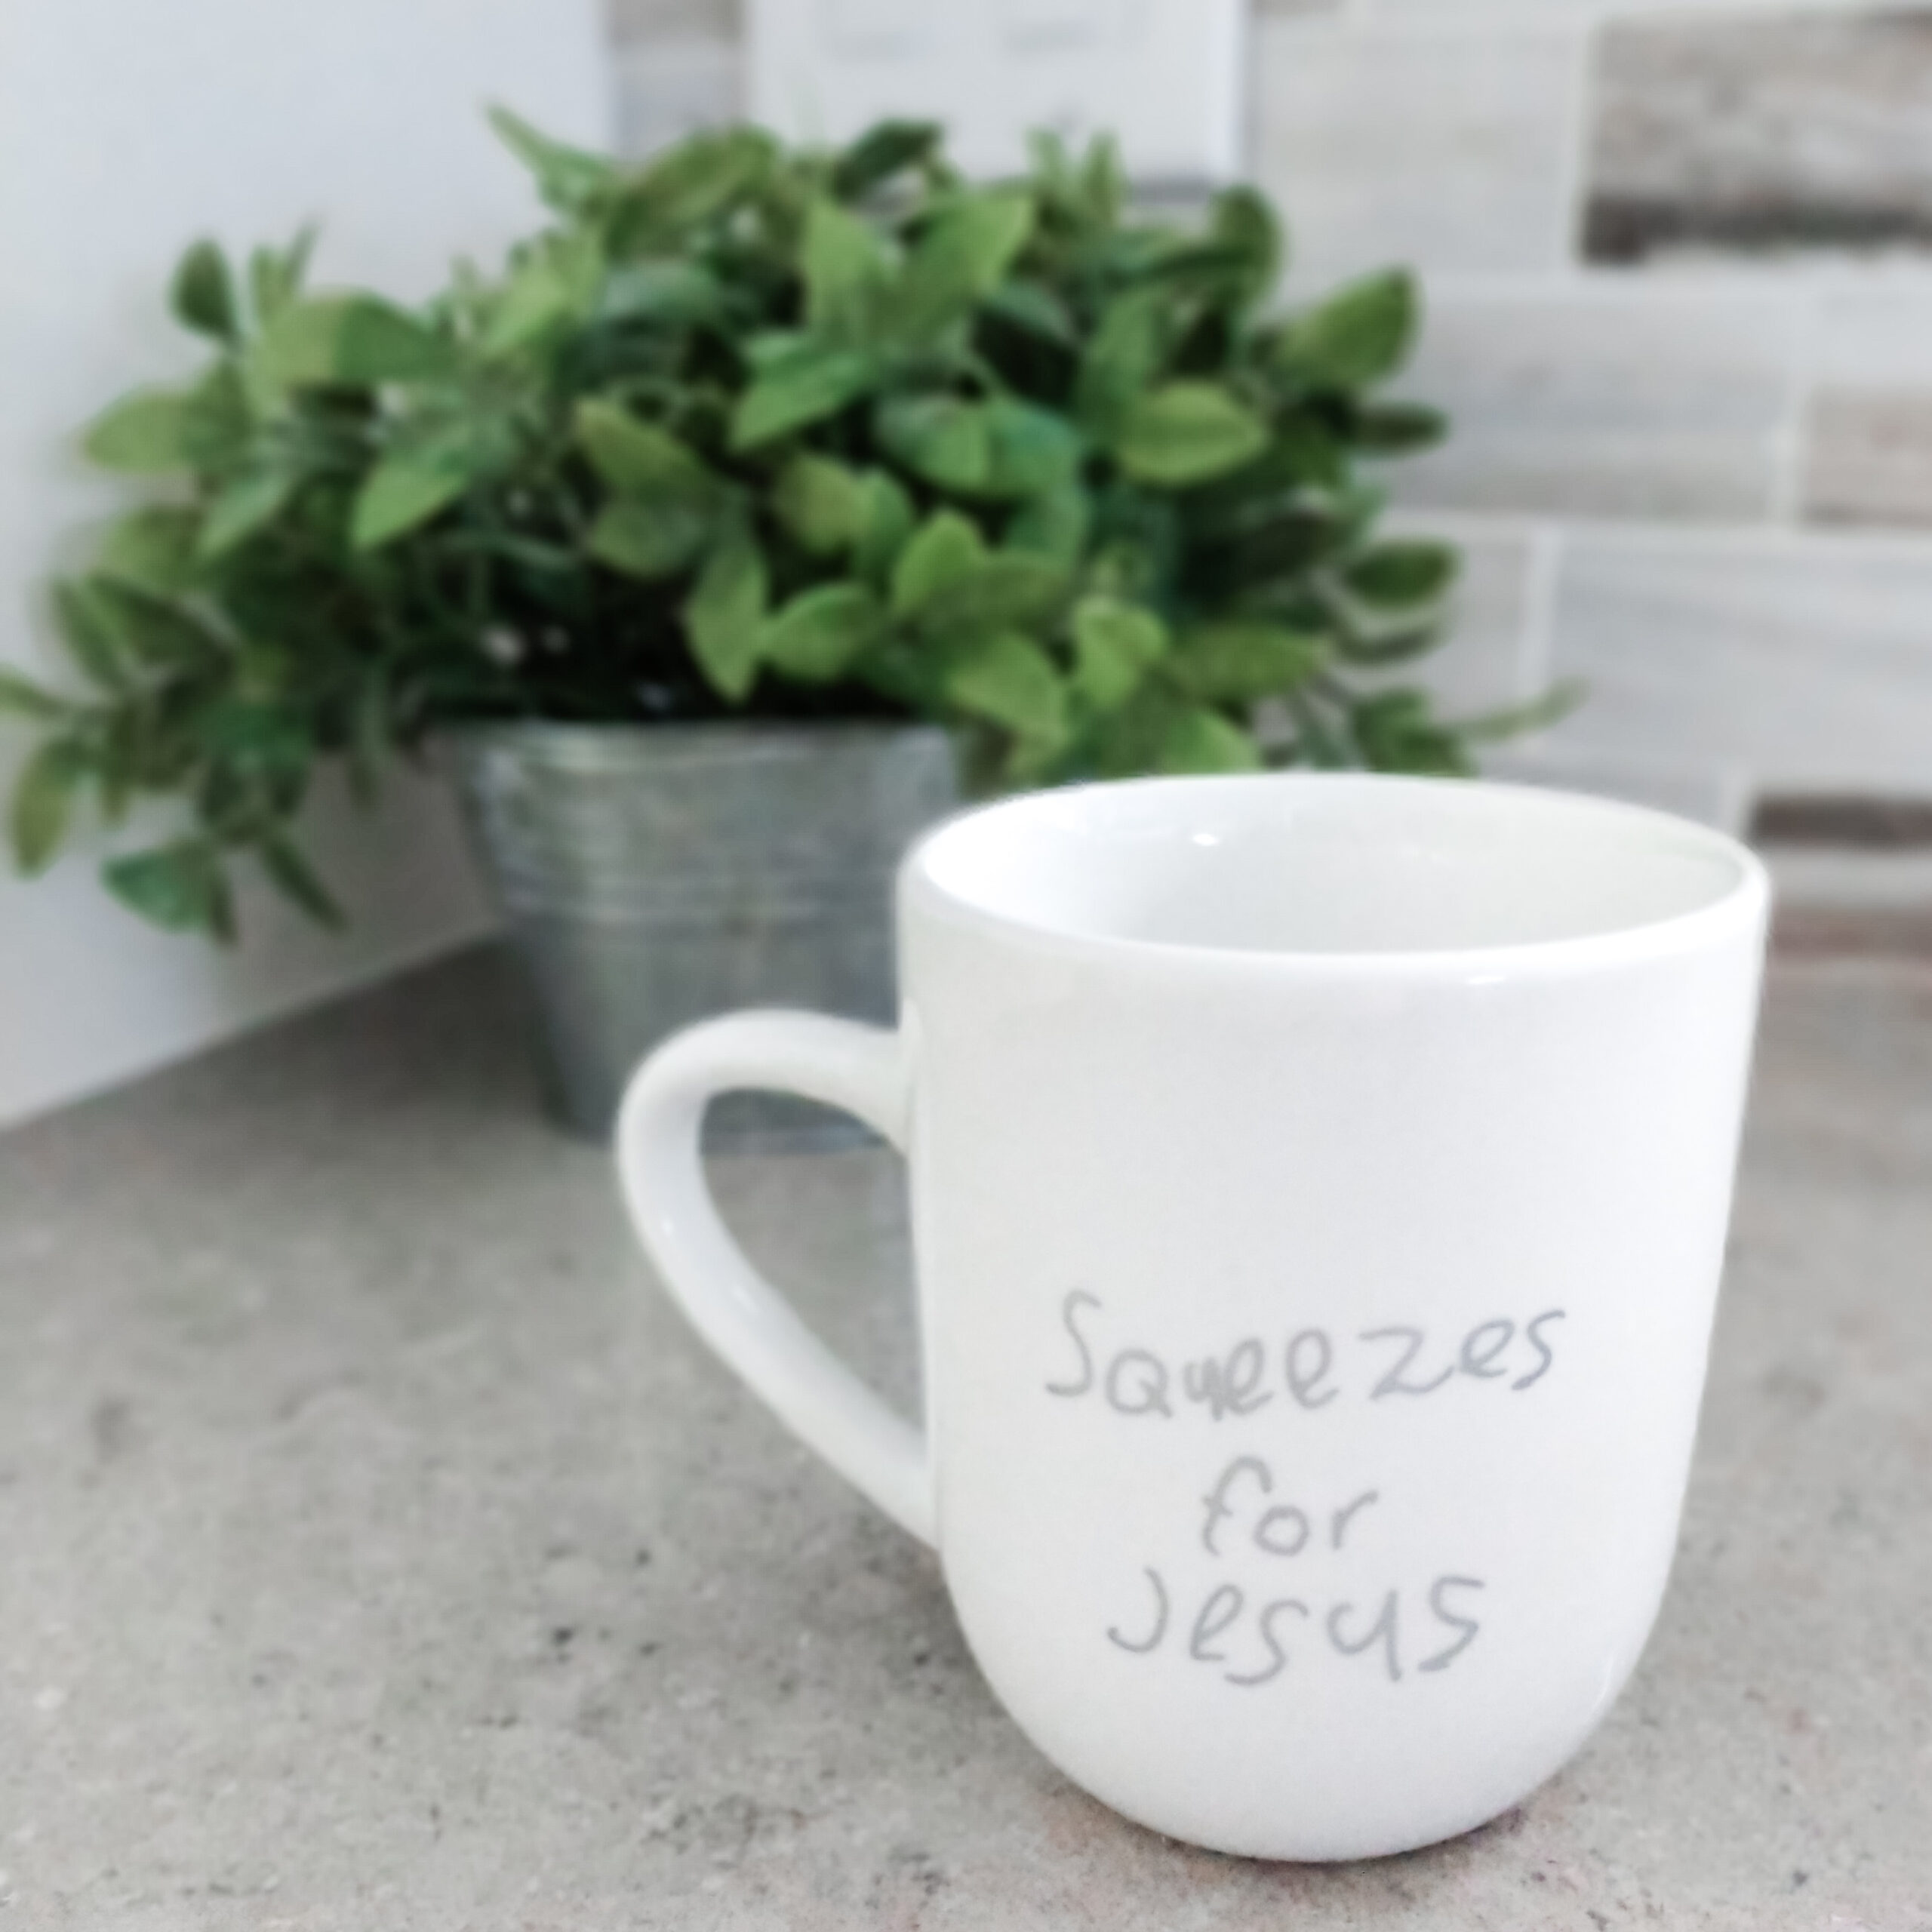 Mug Design with the phrase "Squeezes for Jesus"